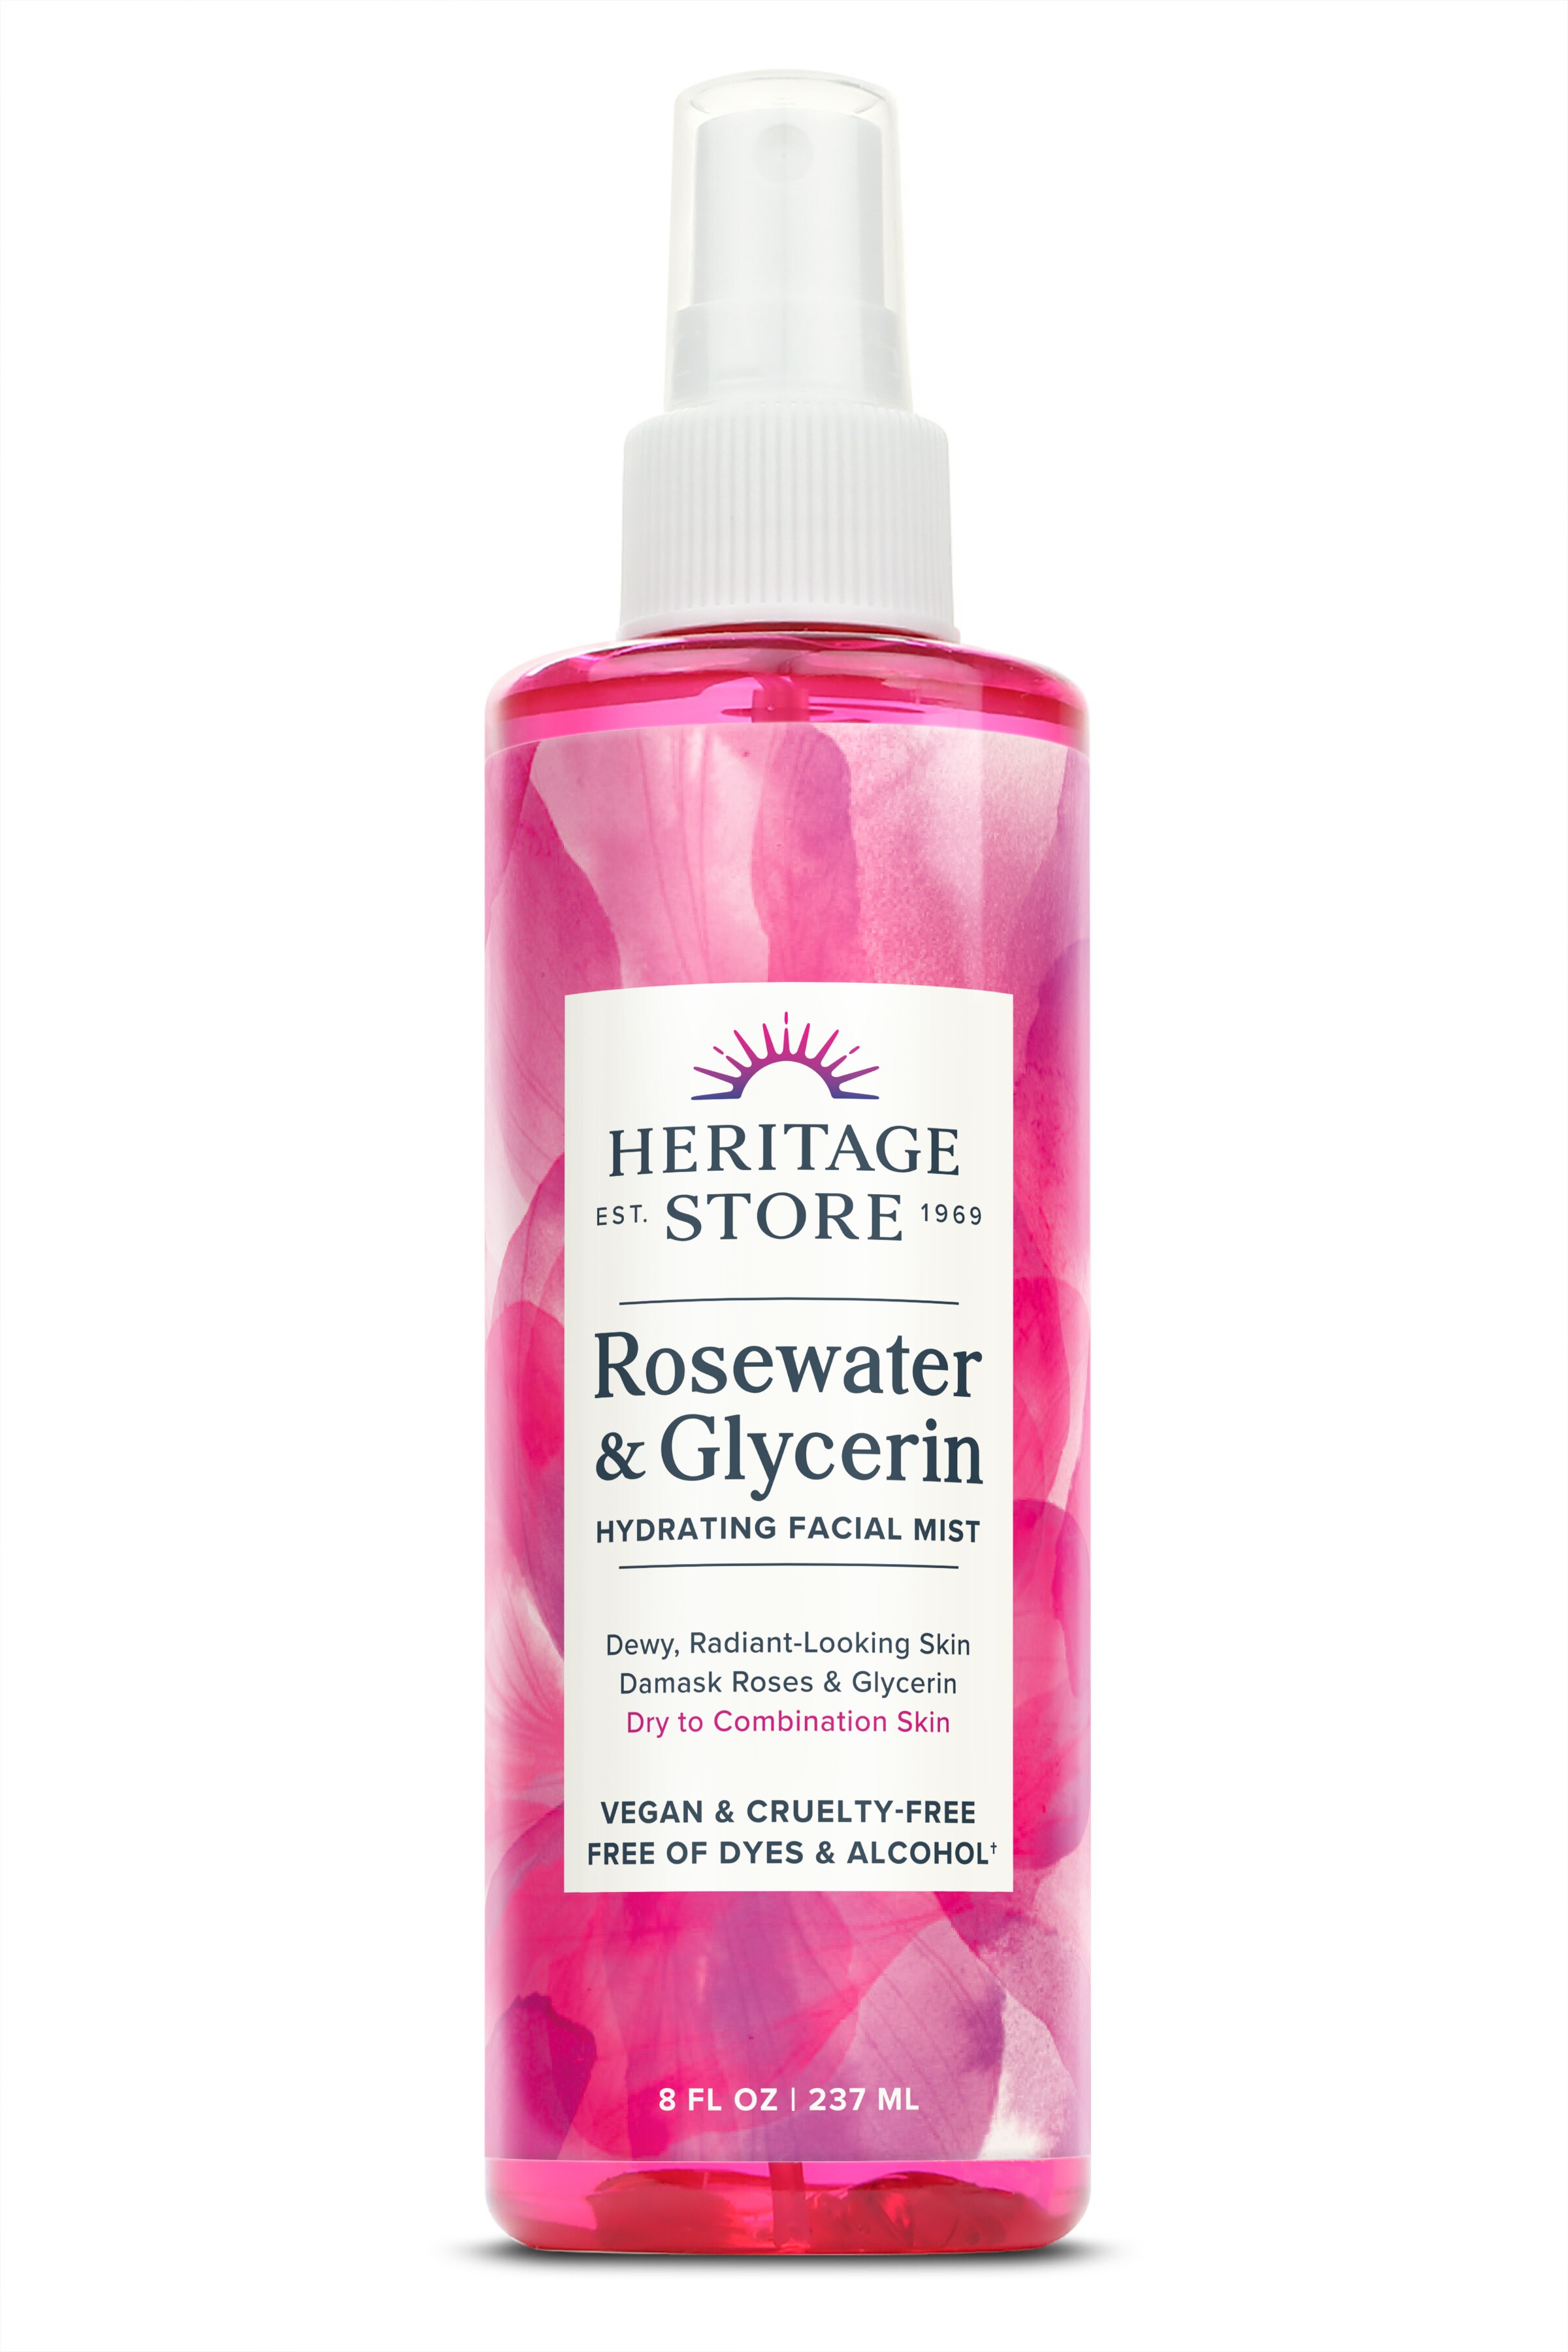 Heritage Store Rosewater & Glycerin Hydrating Facial Mist, 8 OZ